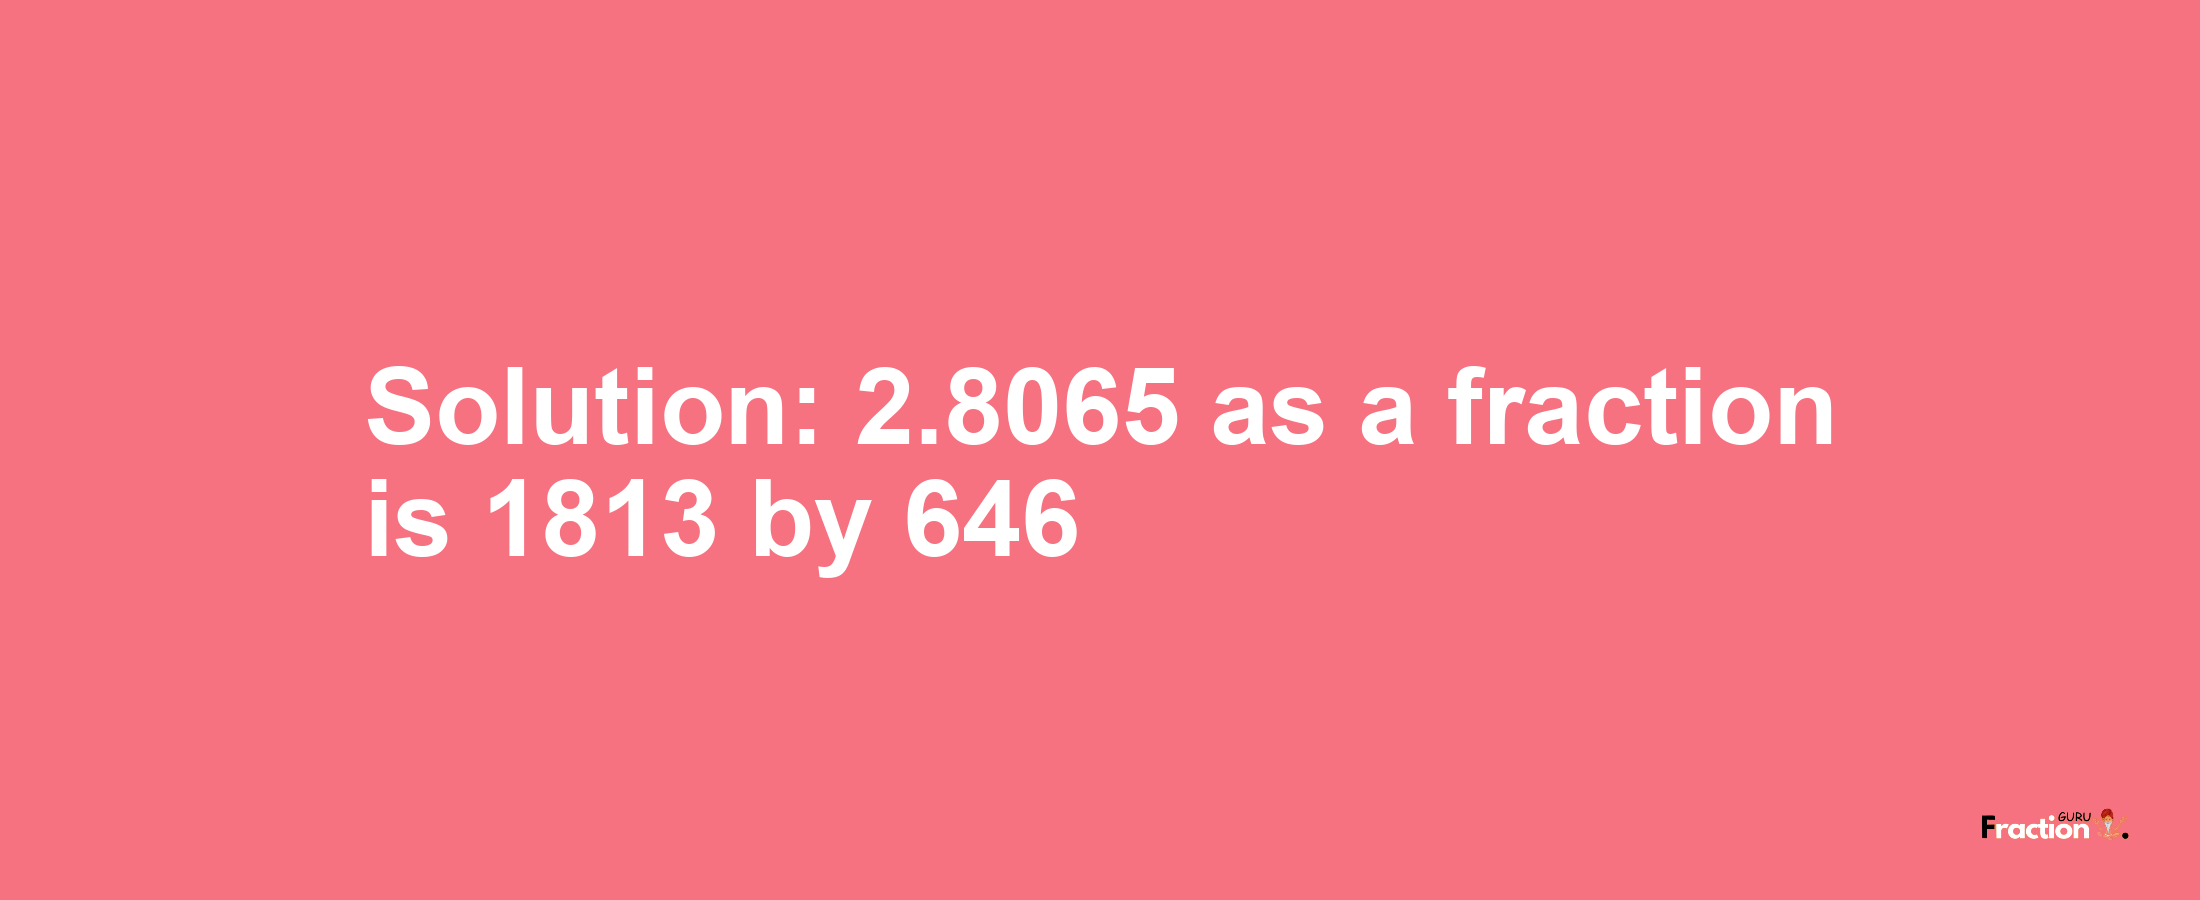 Solution:2.8065 as a fraction is 1813/646